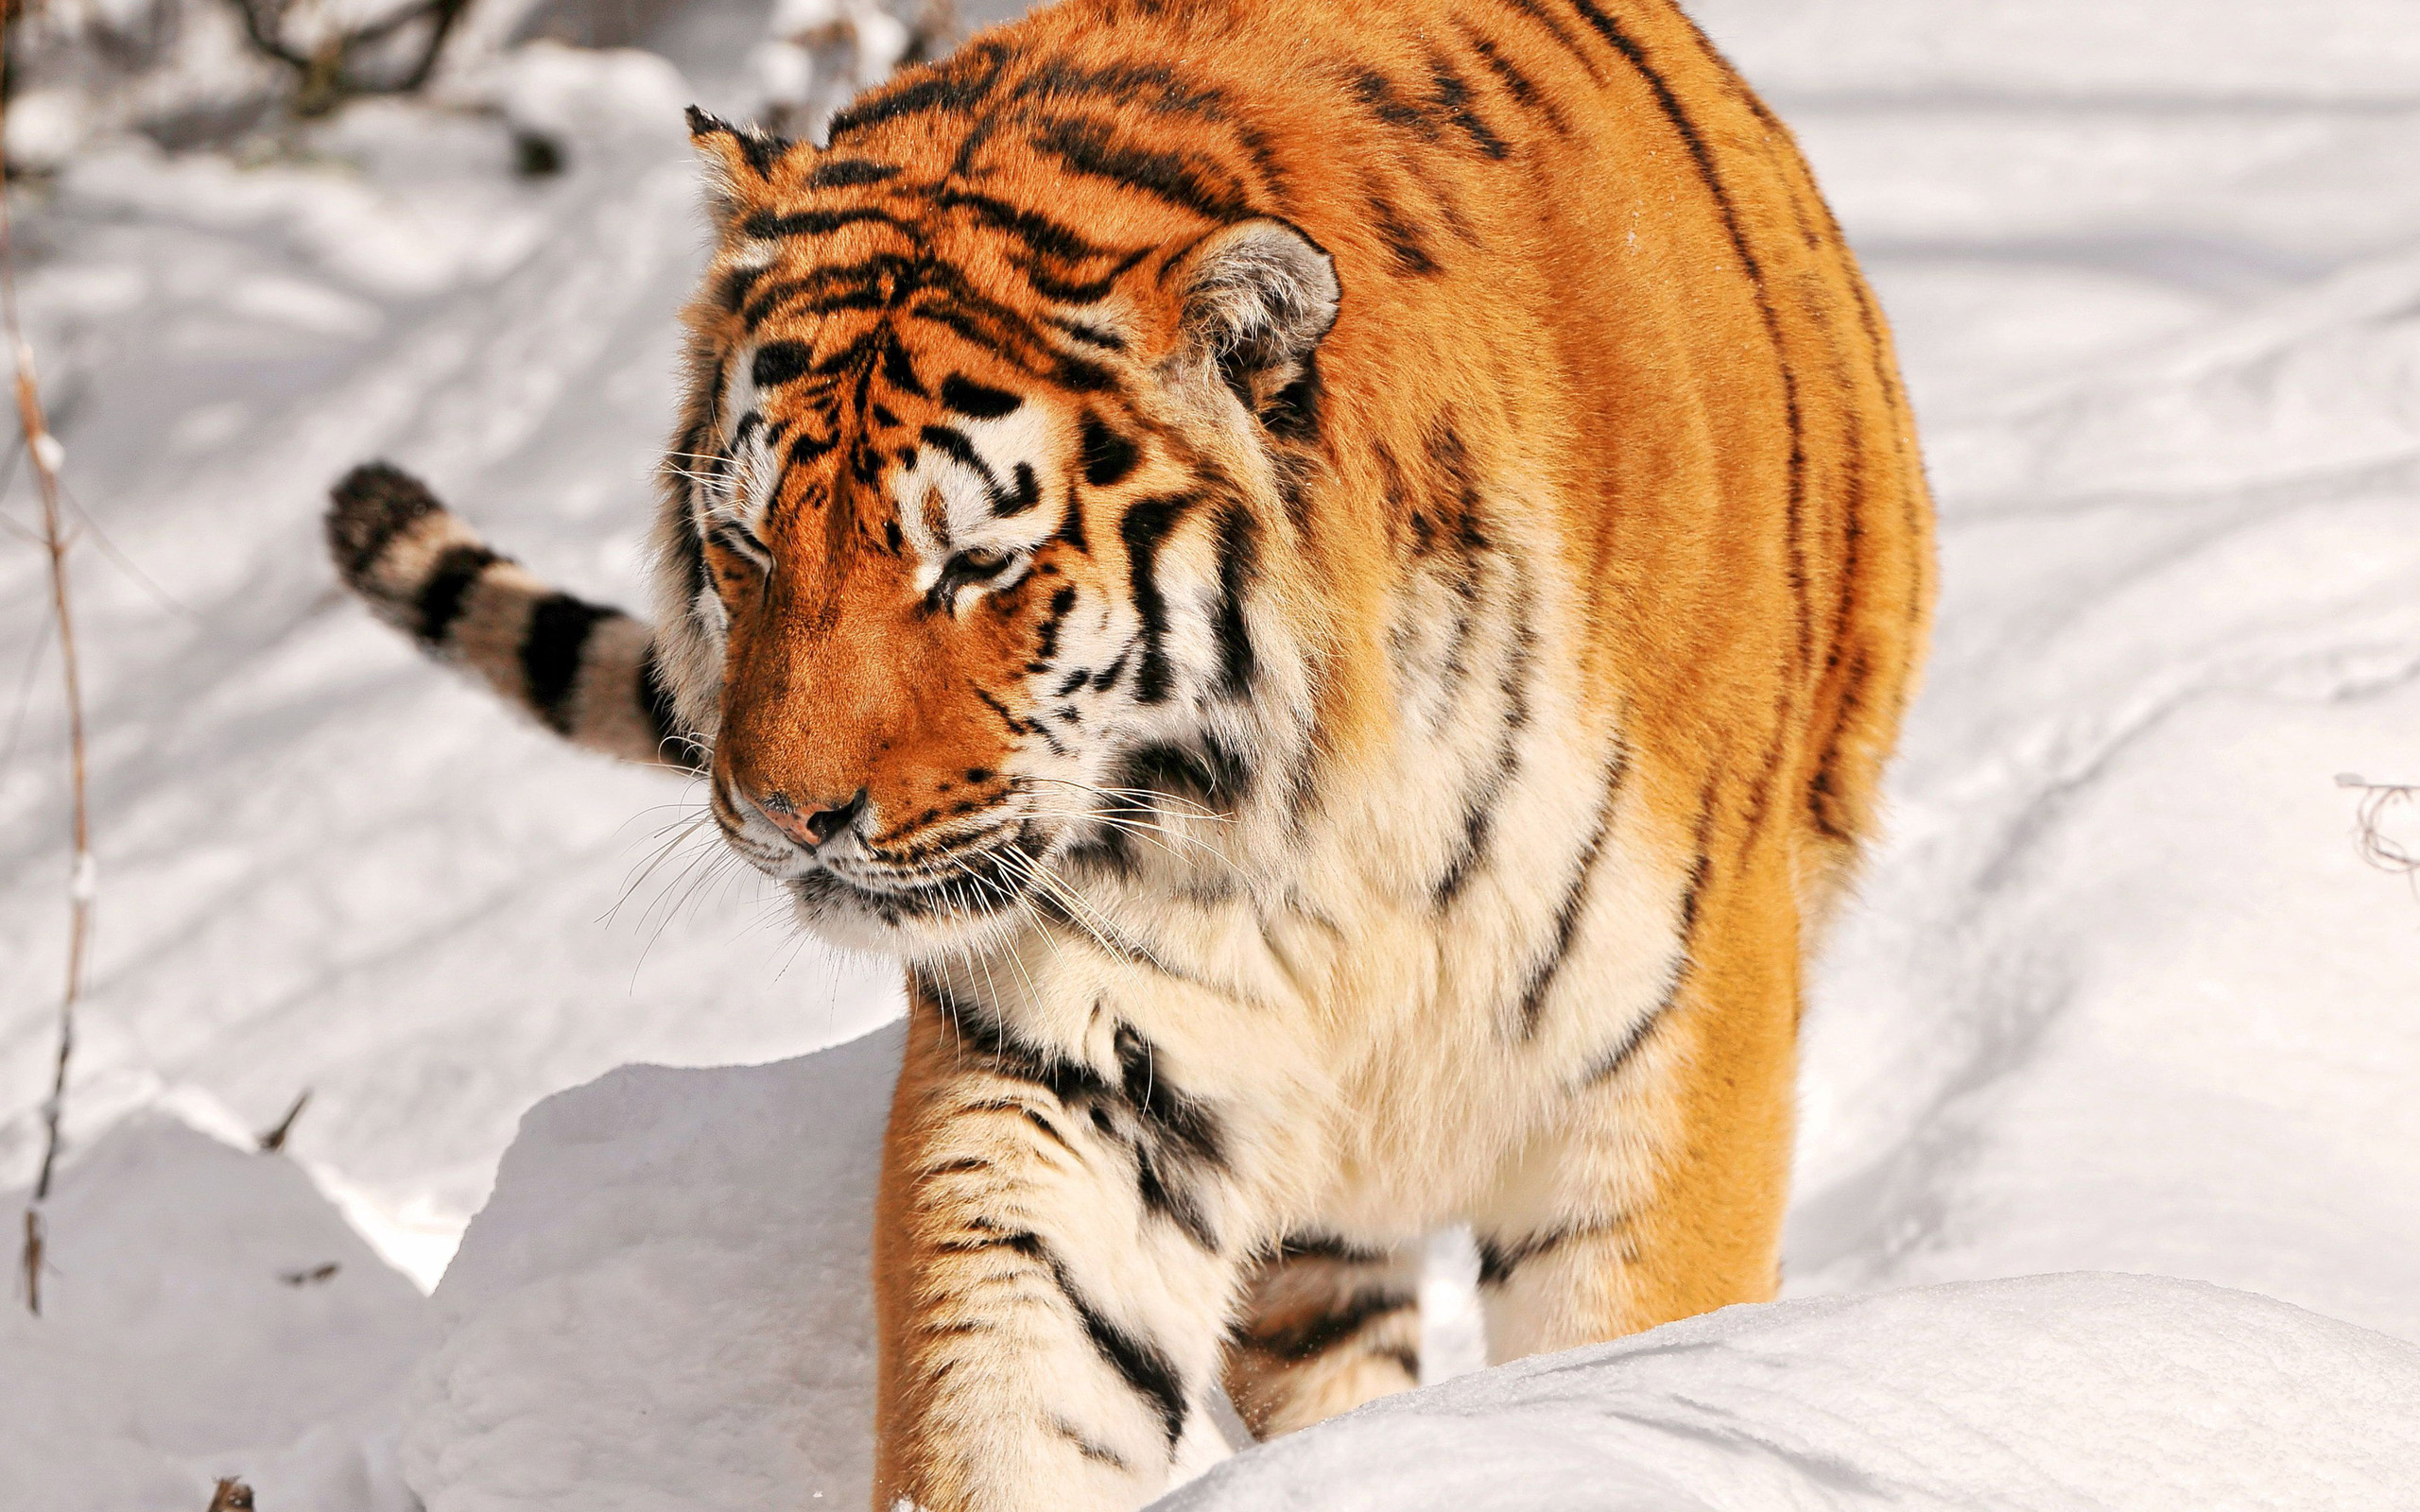 Tiger In Snow Pictures Download